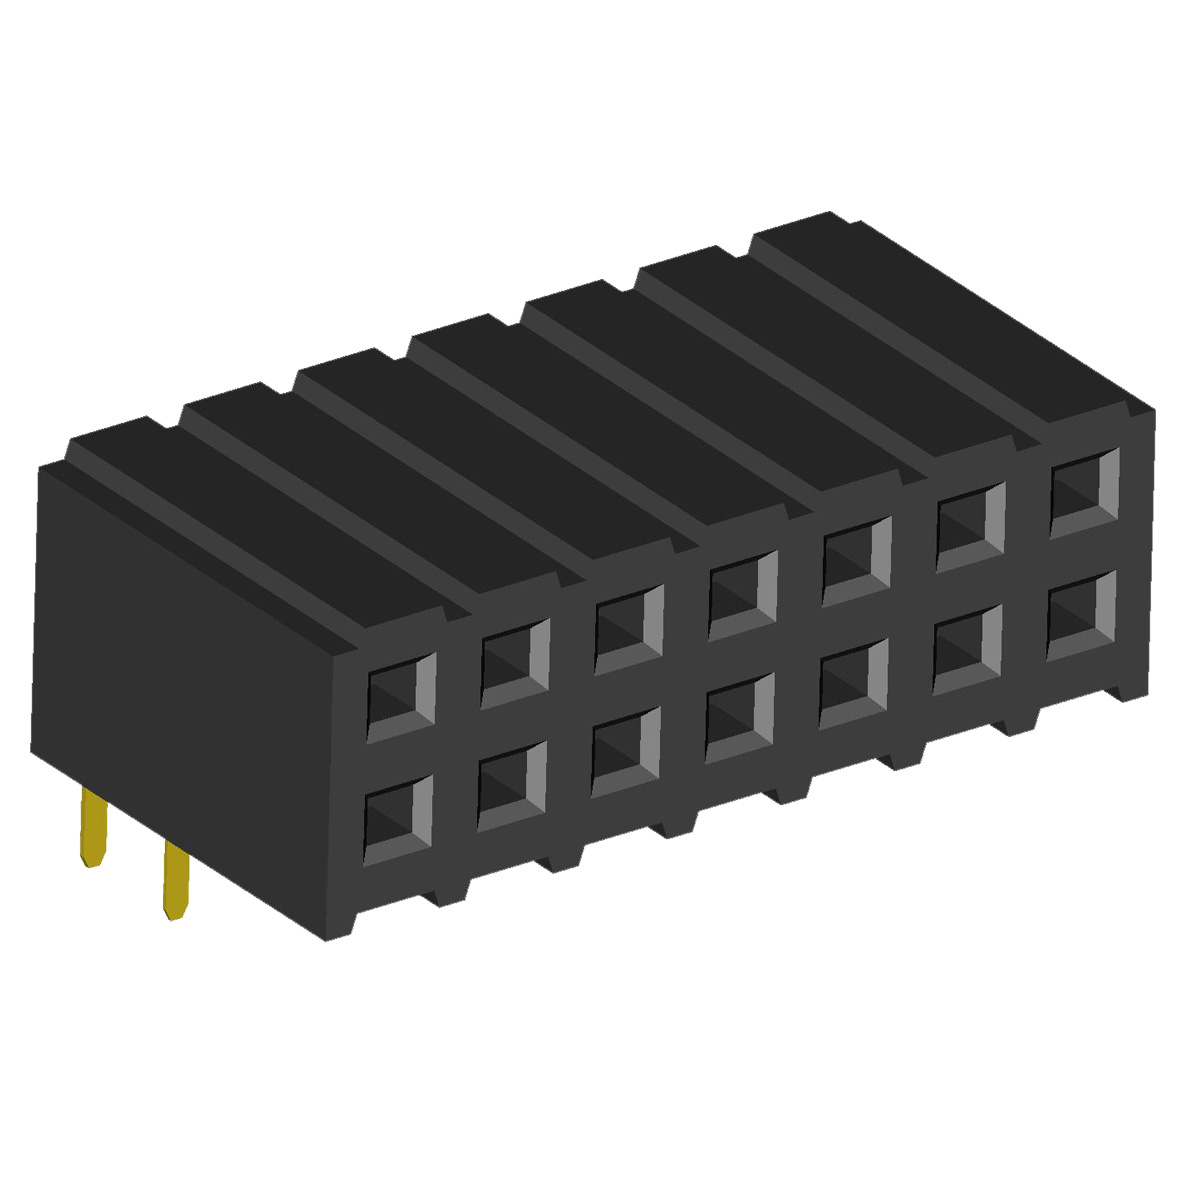 2207R-XXG (PBD2-XXR) series, sockets, angled, double-row, for mounting into holes, pitch 2,0x2,0 mm, Board-to-Board connectors, pin headers and sockets > pitch 2,0x2,0 mm